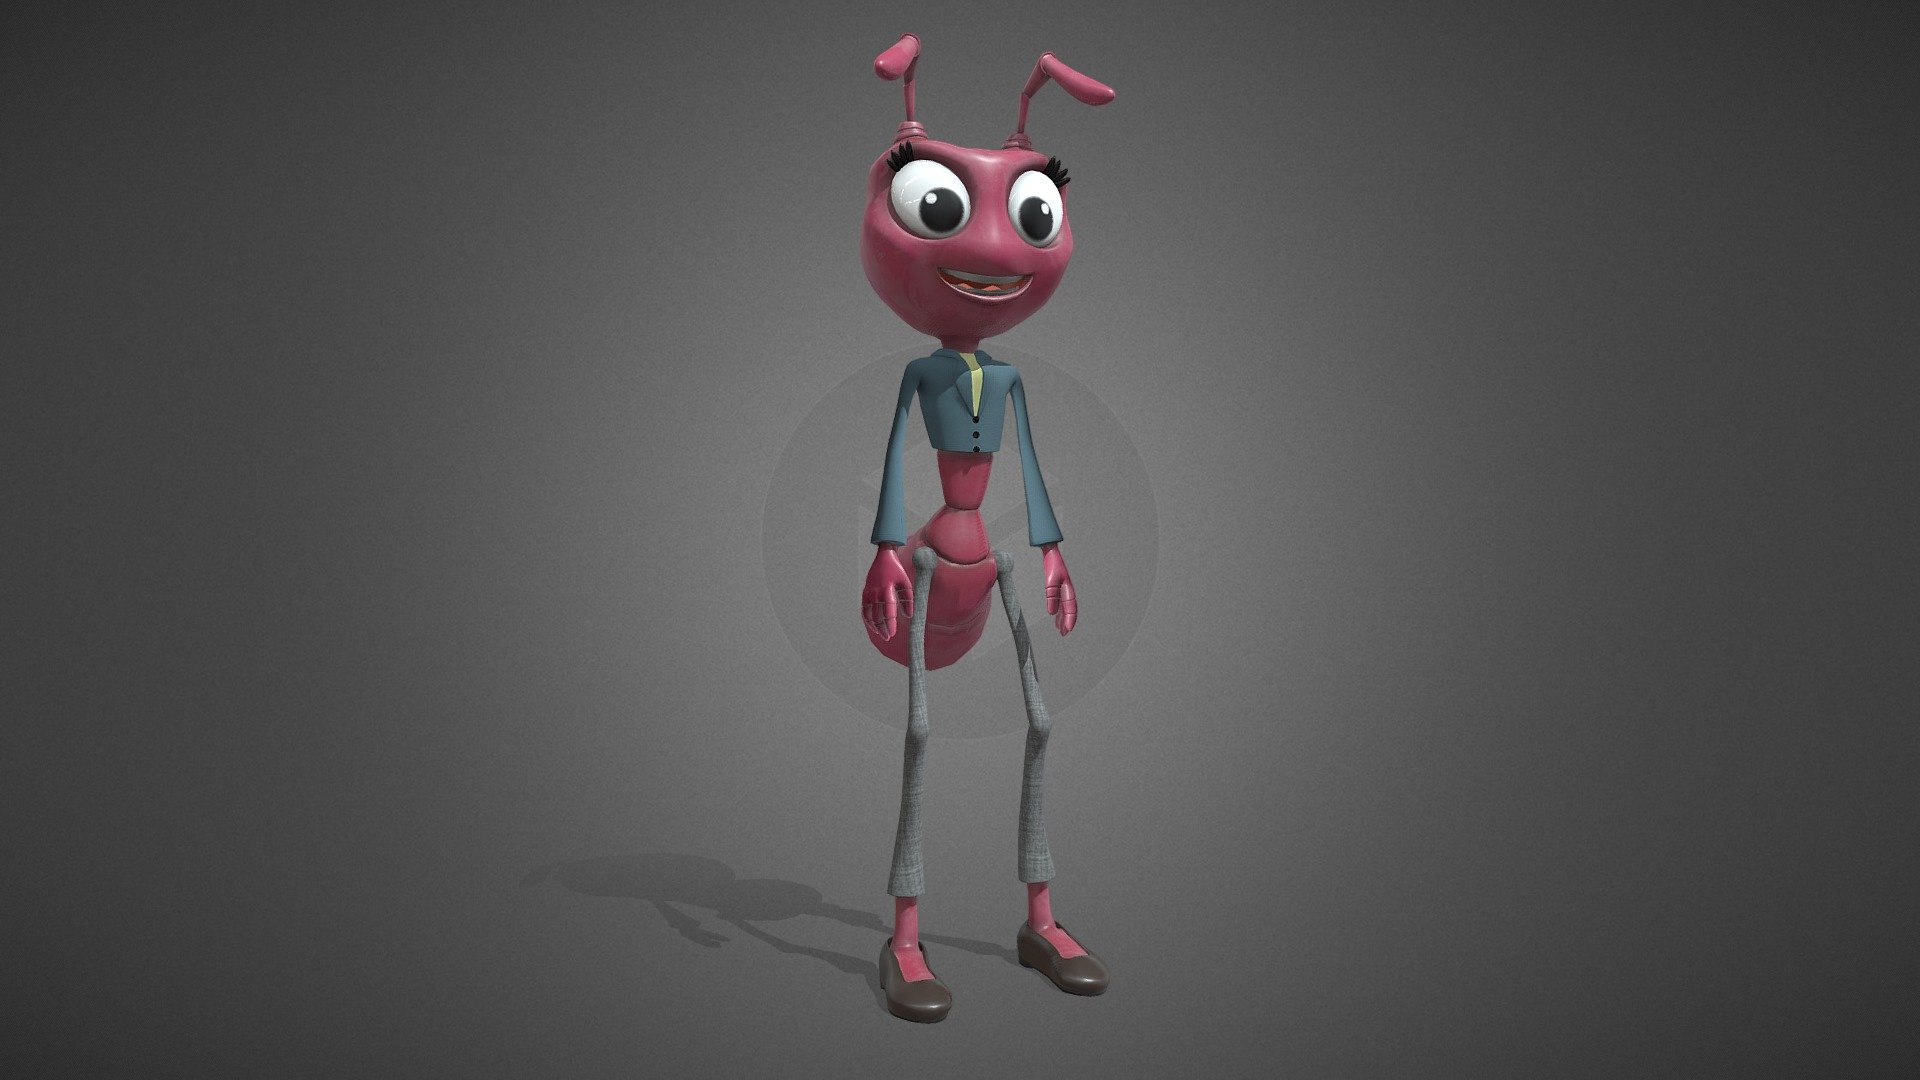 An Ant worker character, based off of multiple referenes found online.  All modeling was done in Blender, unwrapped in Maya, and textured in Substance Painter.  Animation by Mixamo 3d model